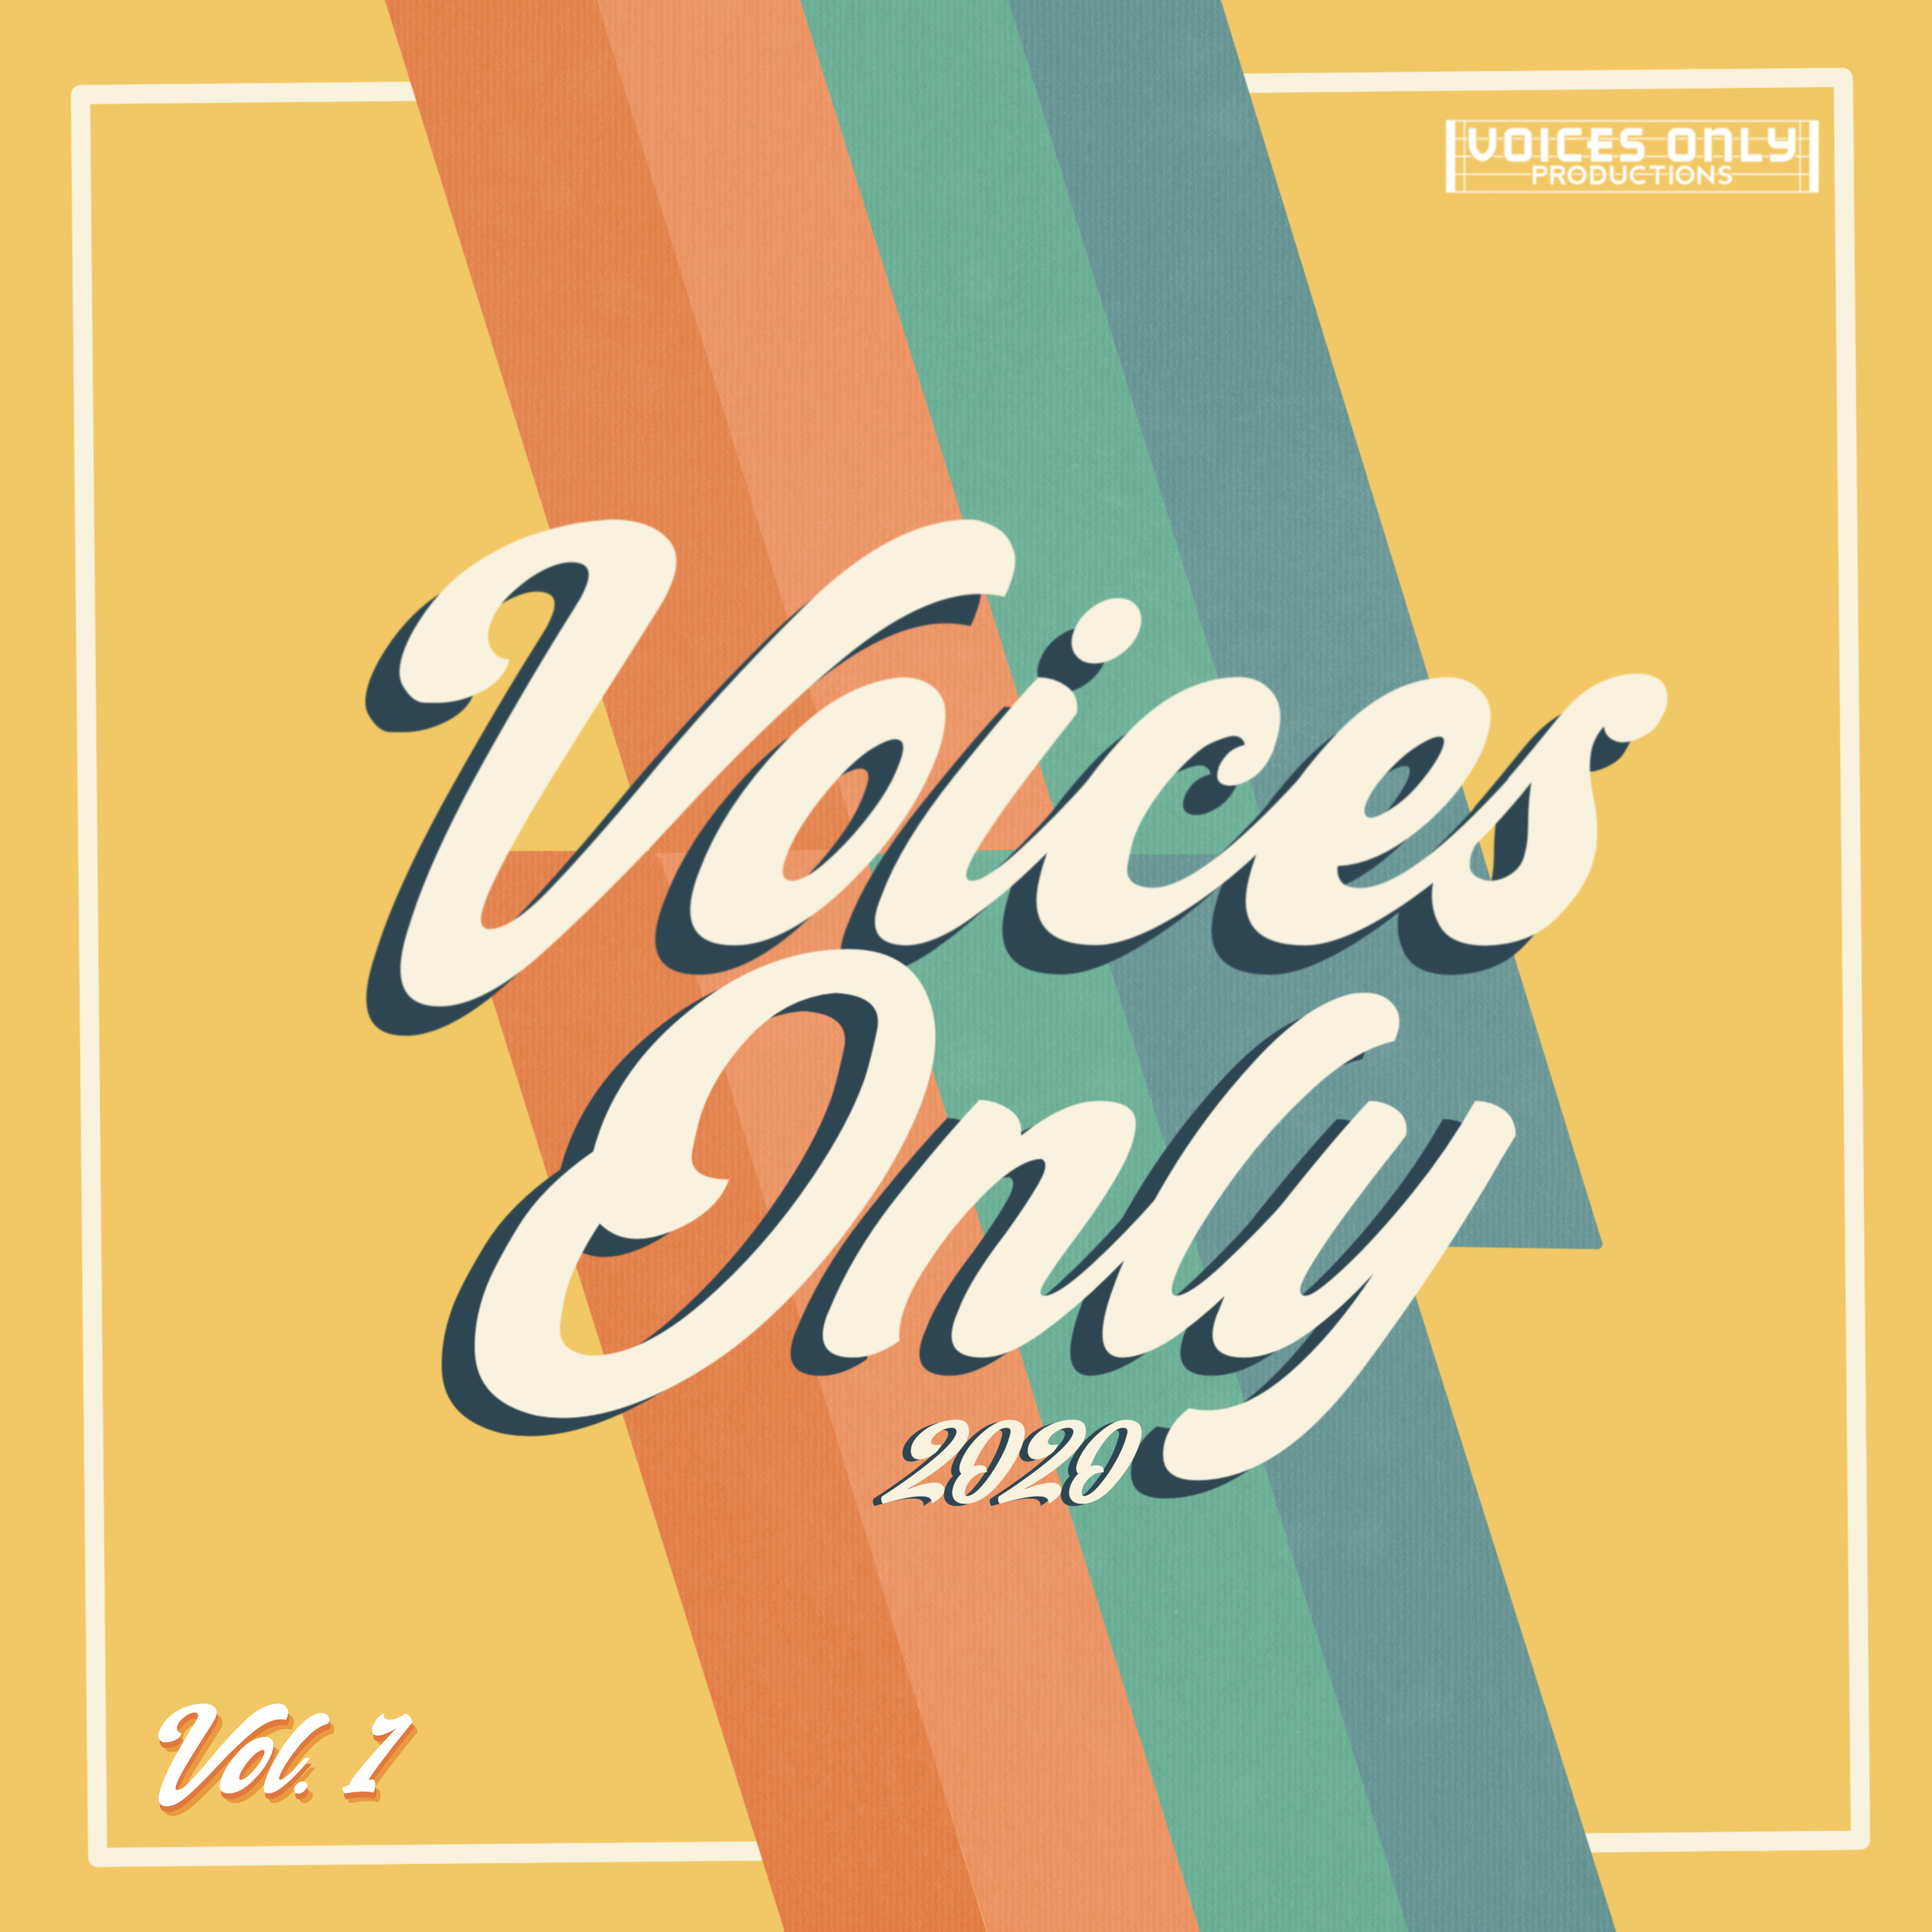 Voices Only 2016